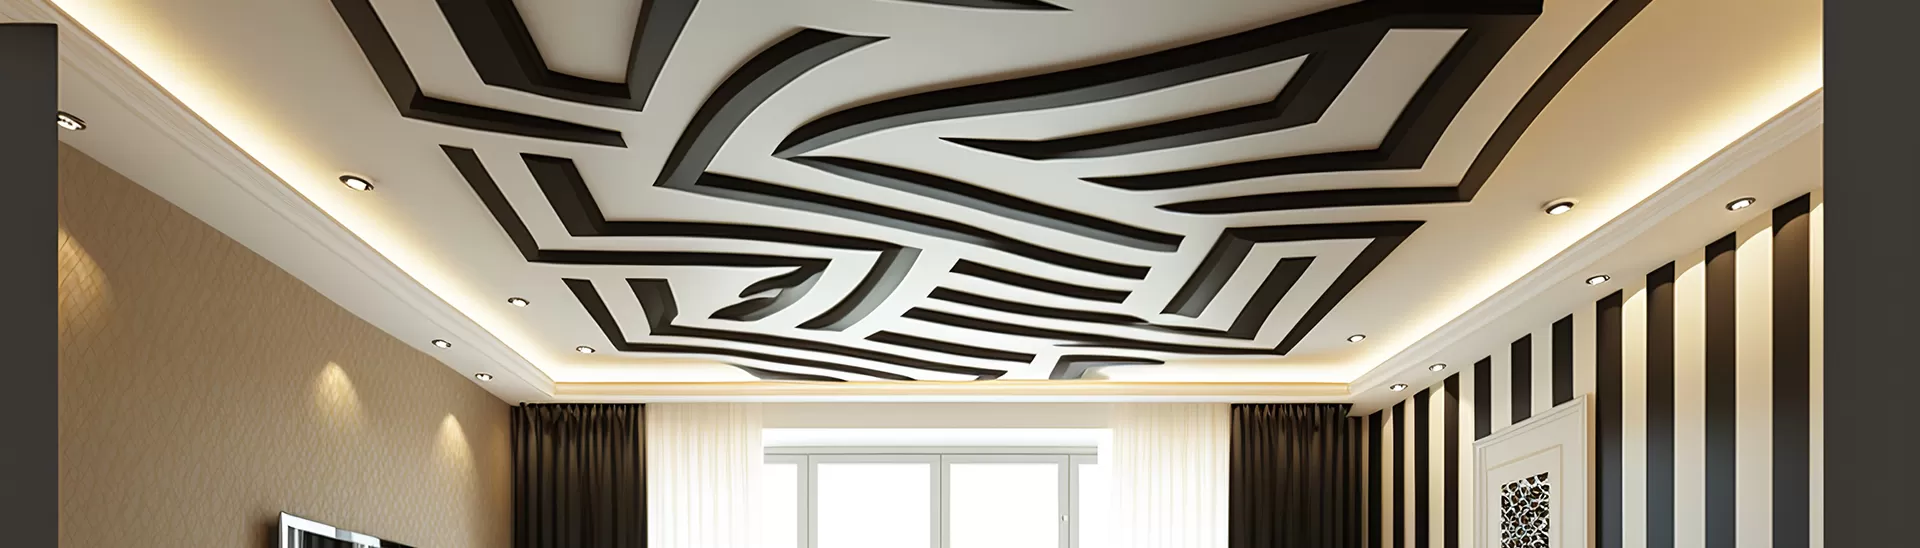 simple wooden ceiling designs